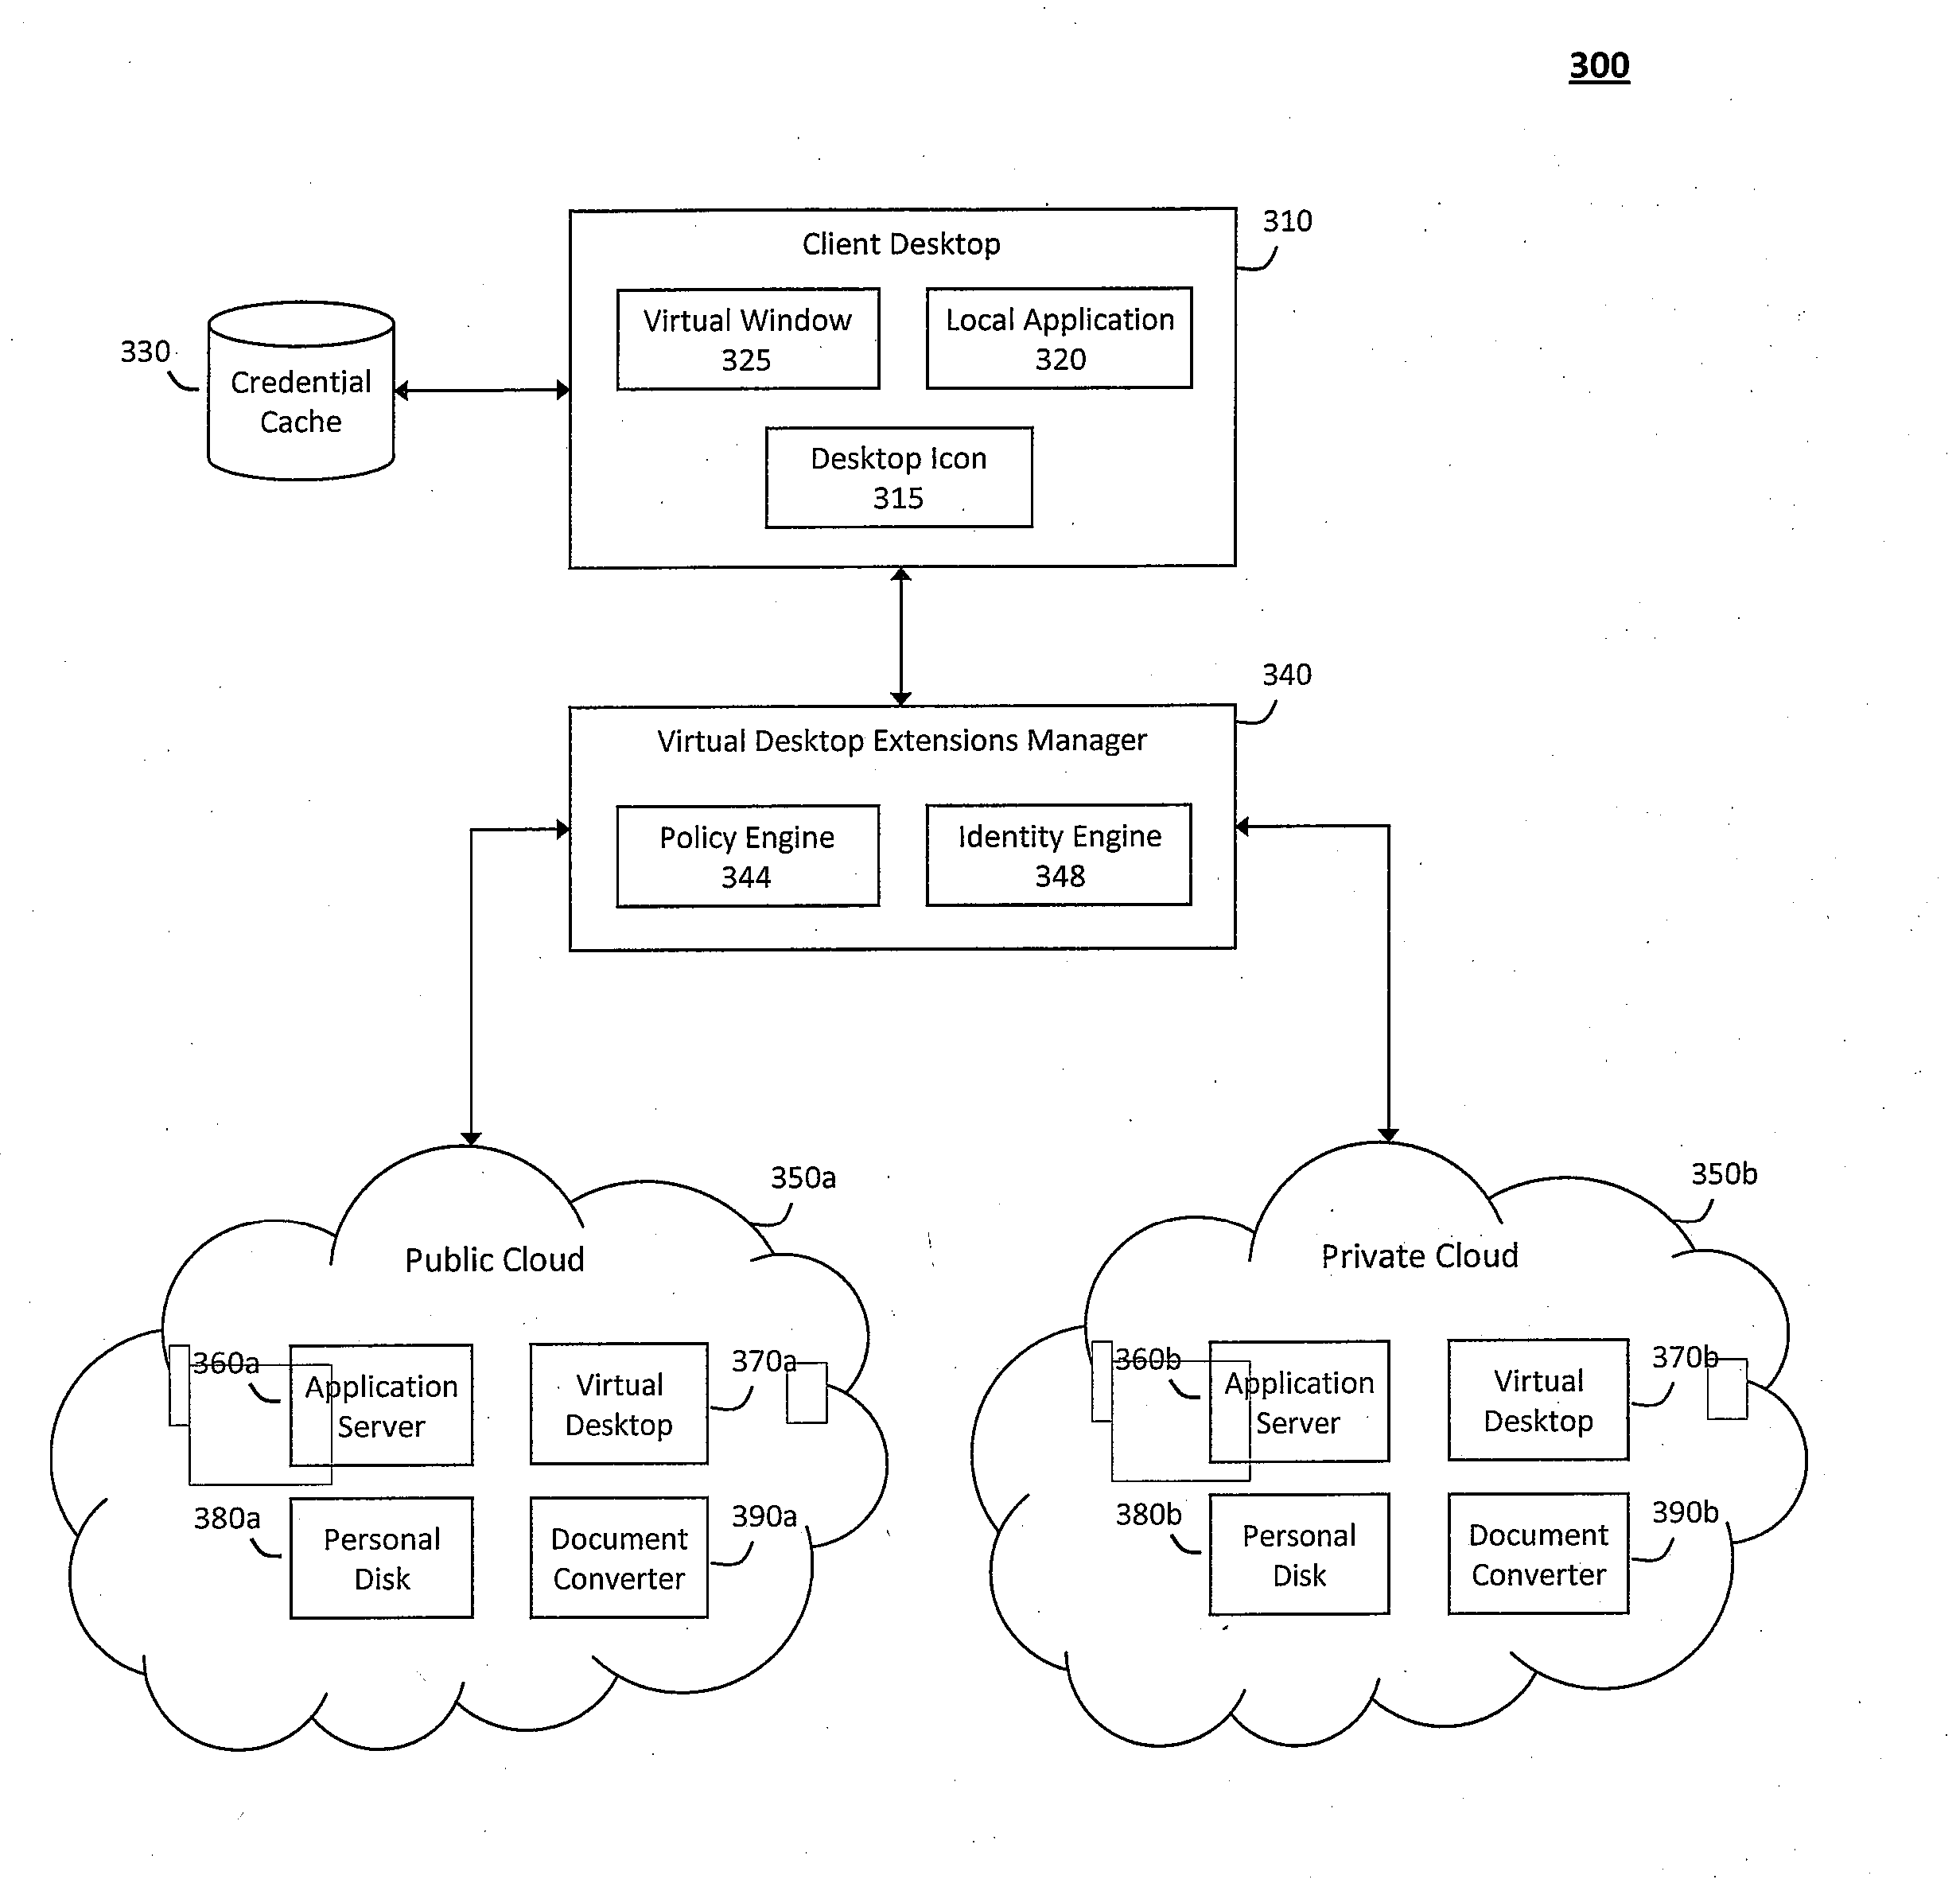 System and method for providing virtual desktop extensions on a client desktop